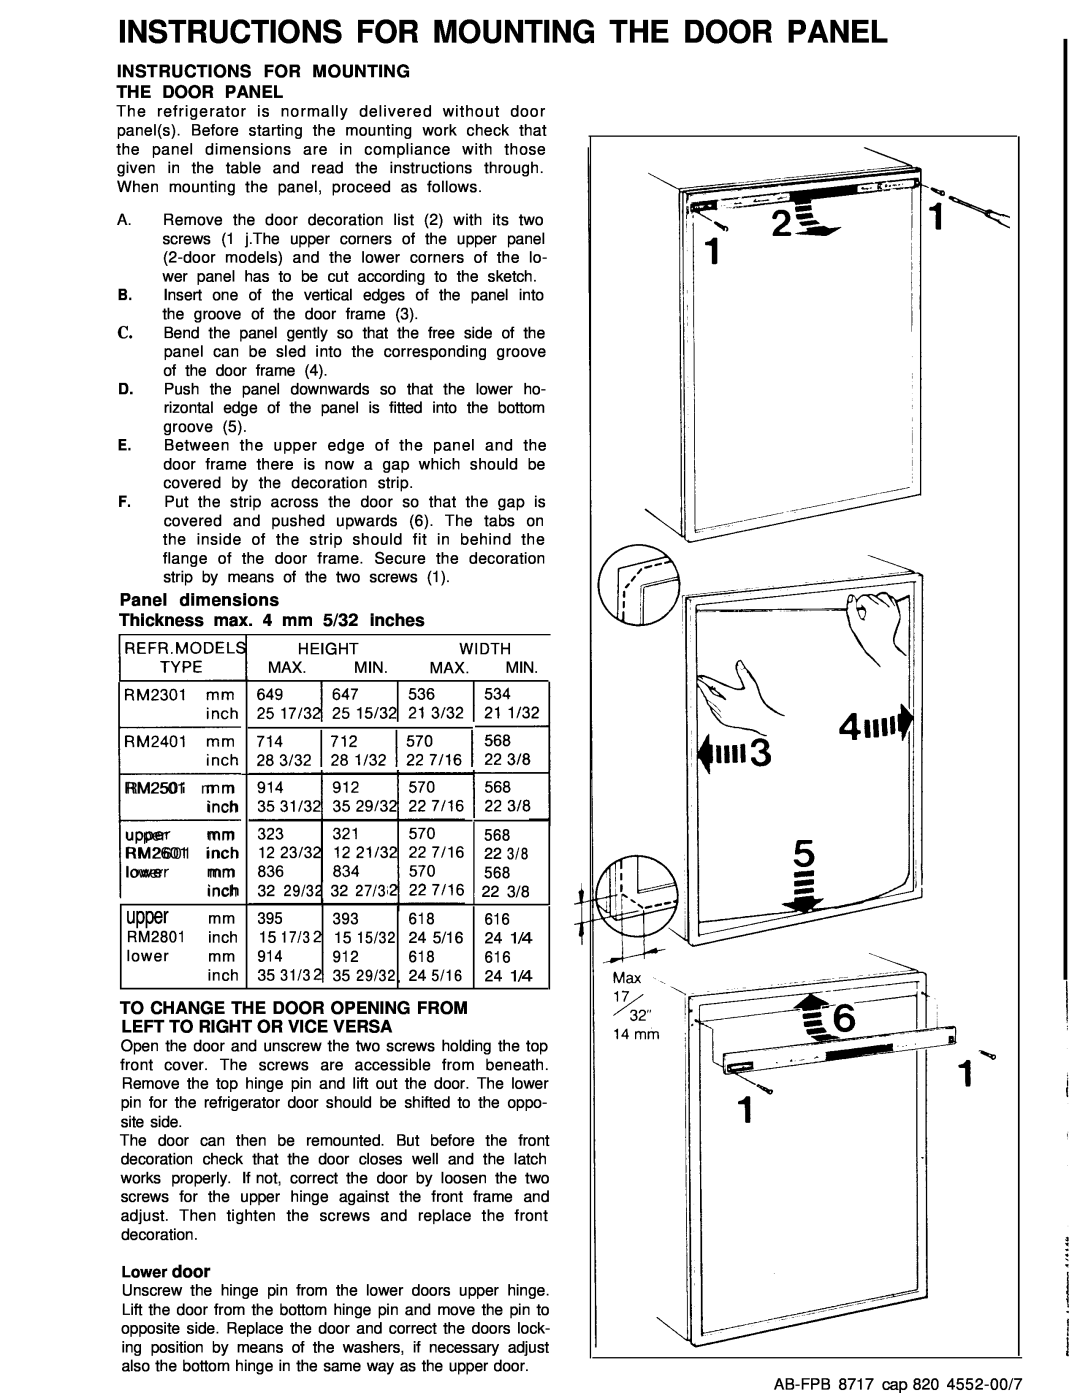 Dometic RM2501 Instructions For Mounting The Door Panel, Panel dimensions, Thi kness max. 4 mm, 5/32 inches, Lower door 